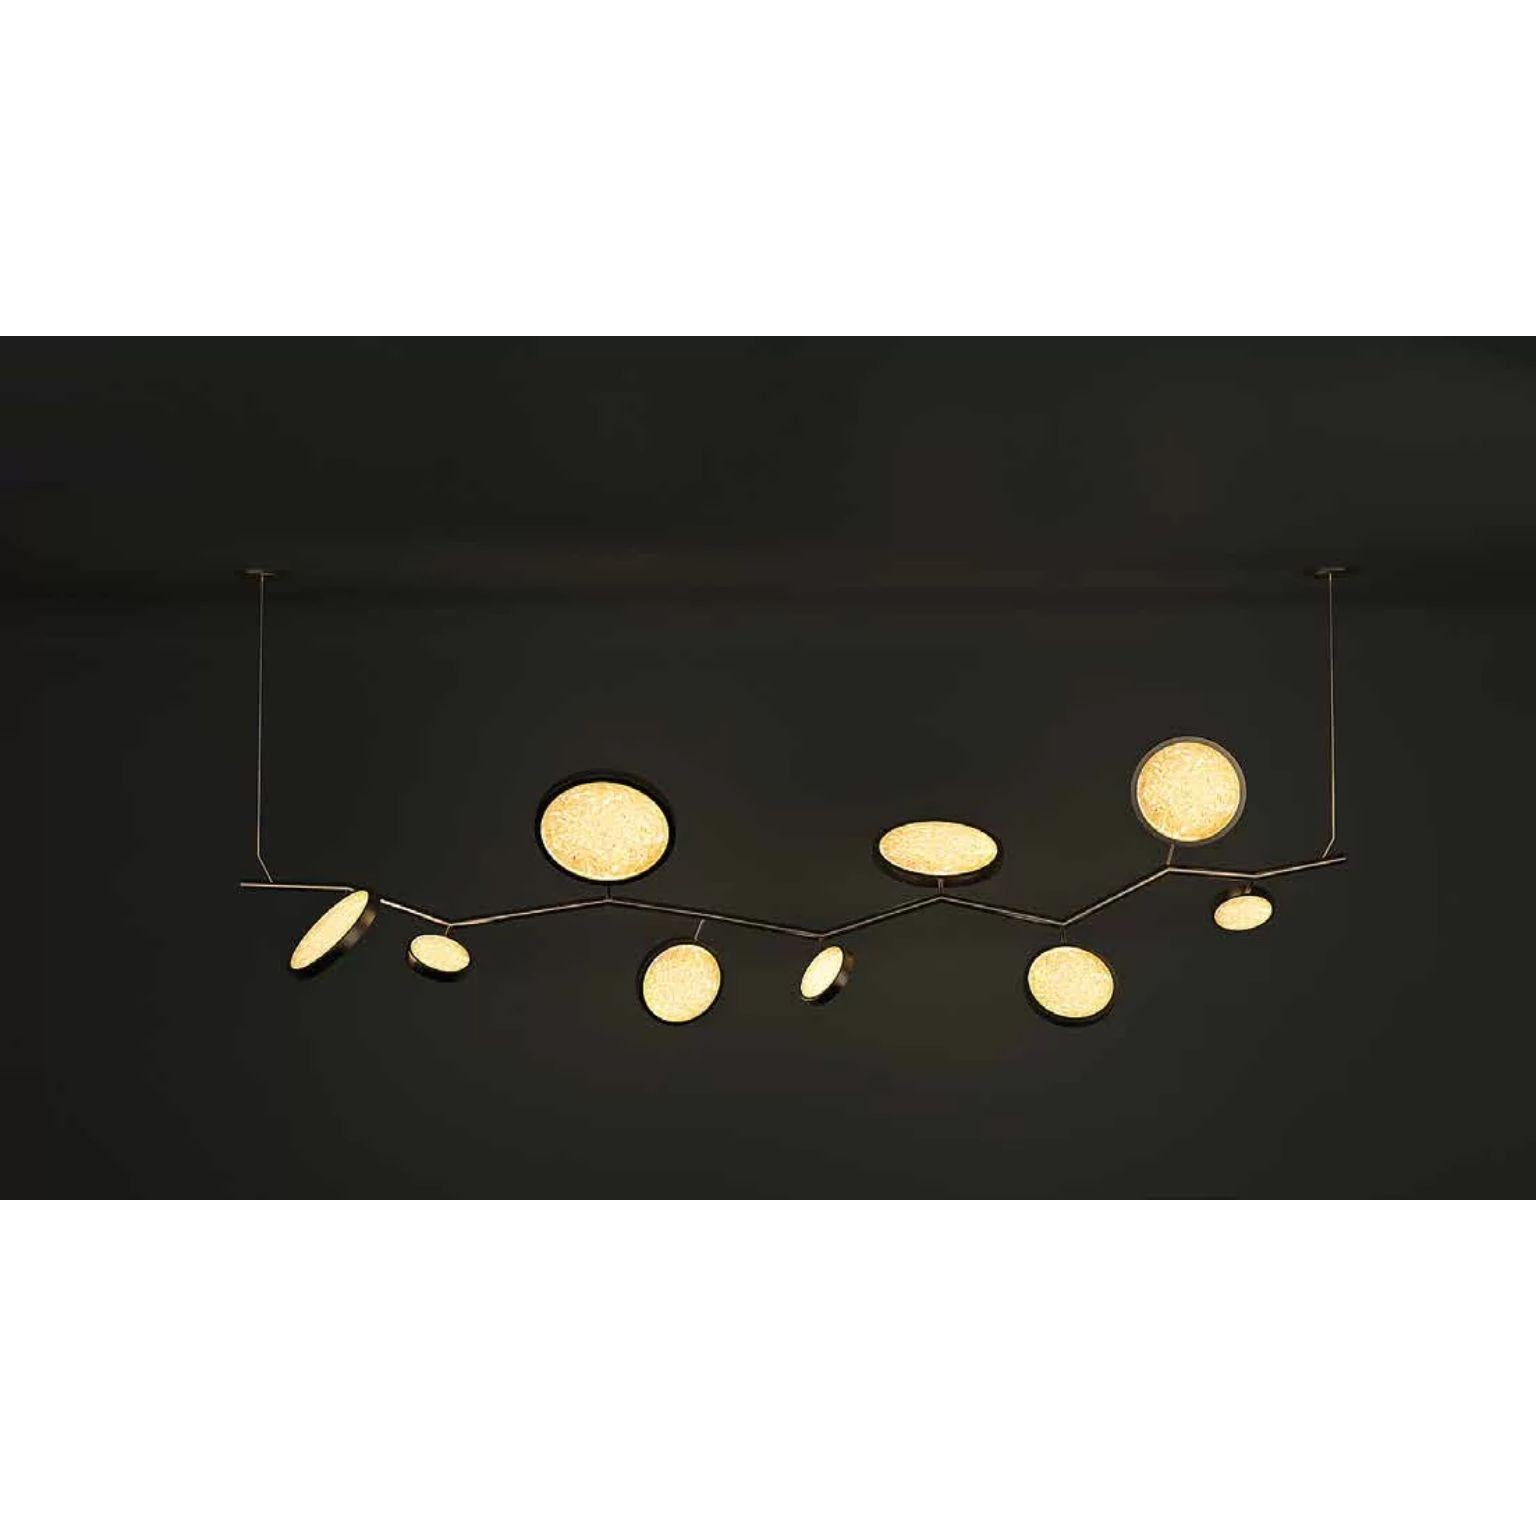 Island Circles Black Brass Pendant Lamp by Dainte
Dimensions: W 200.5 x H 76 cm.
Materials: Glass and blackened brass. 

Also available in natural brass finish. Please contact us.

An extraordinary Island Pendant Circles, featuring ten circles,